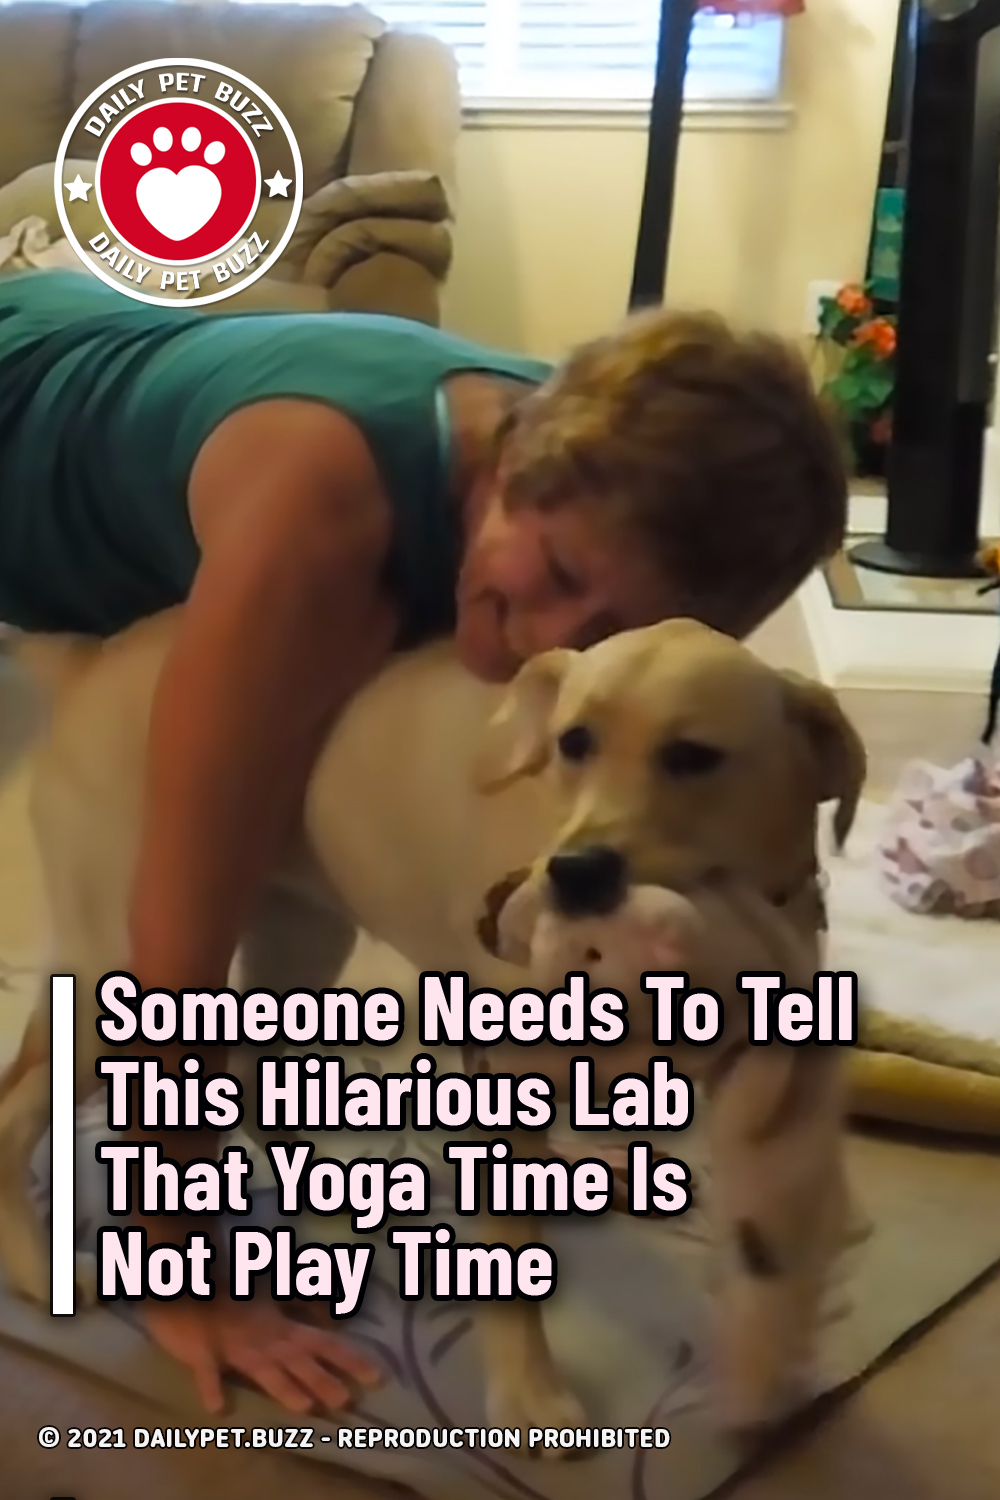 Someone Needs To Tell This Hilarious Lab That Yoga Time Is Not Play Time